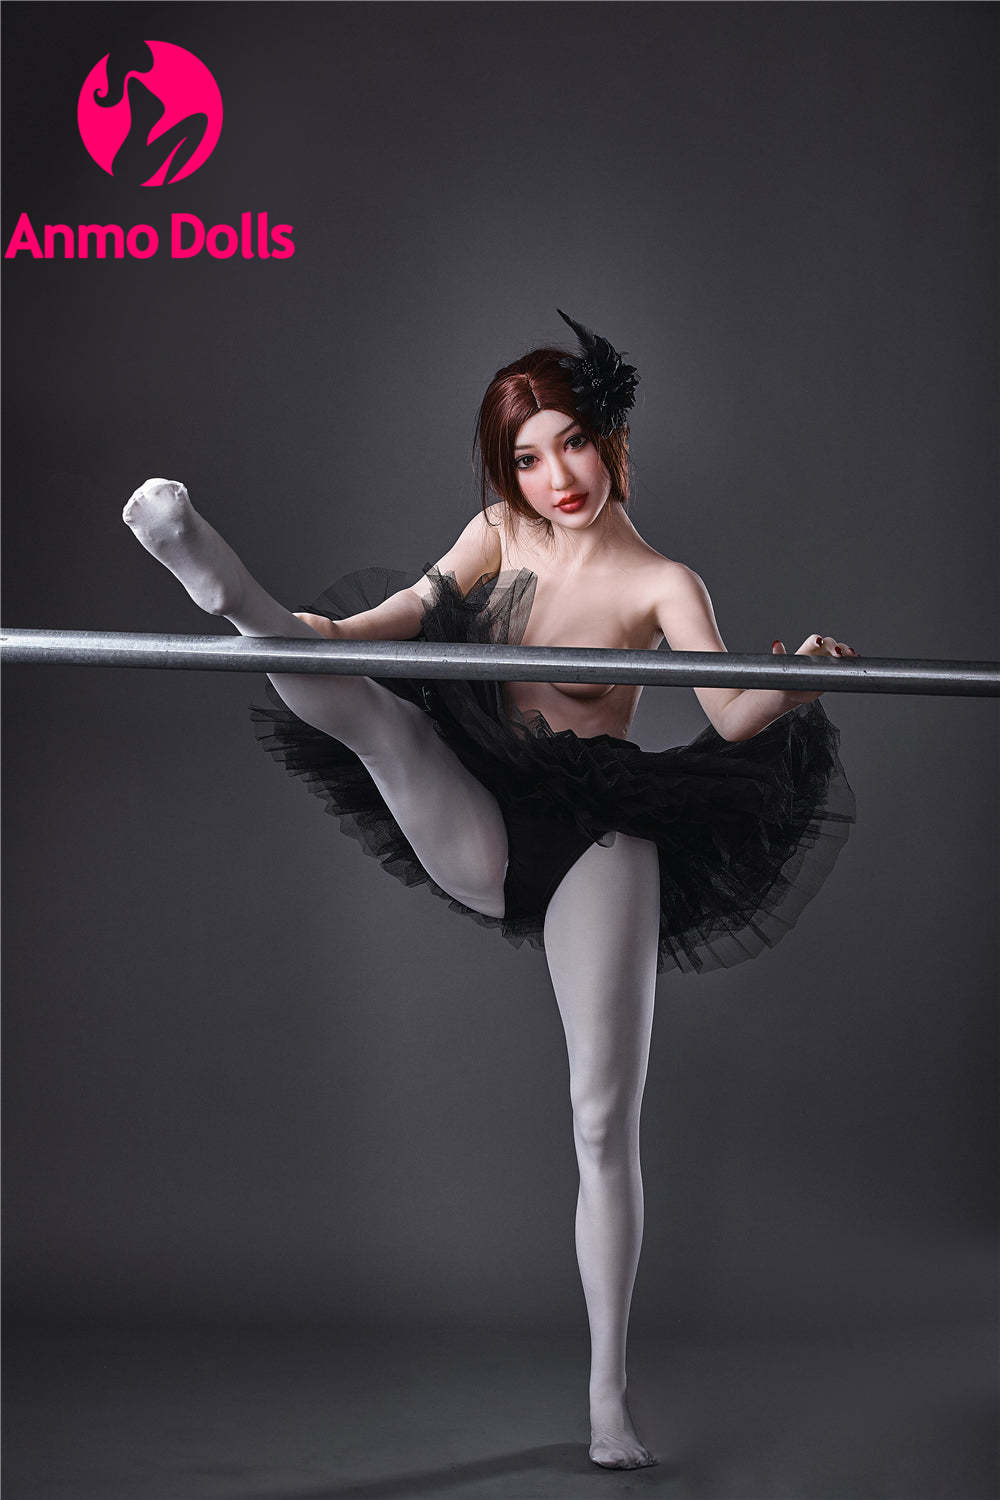 Mikasa  - The Hottest Asian Ballet Sex doll - TPE Sex doll by Anmodolls